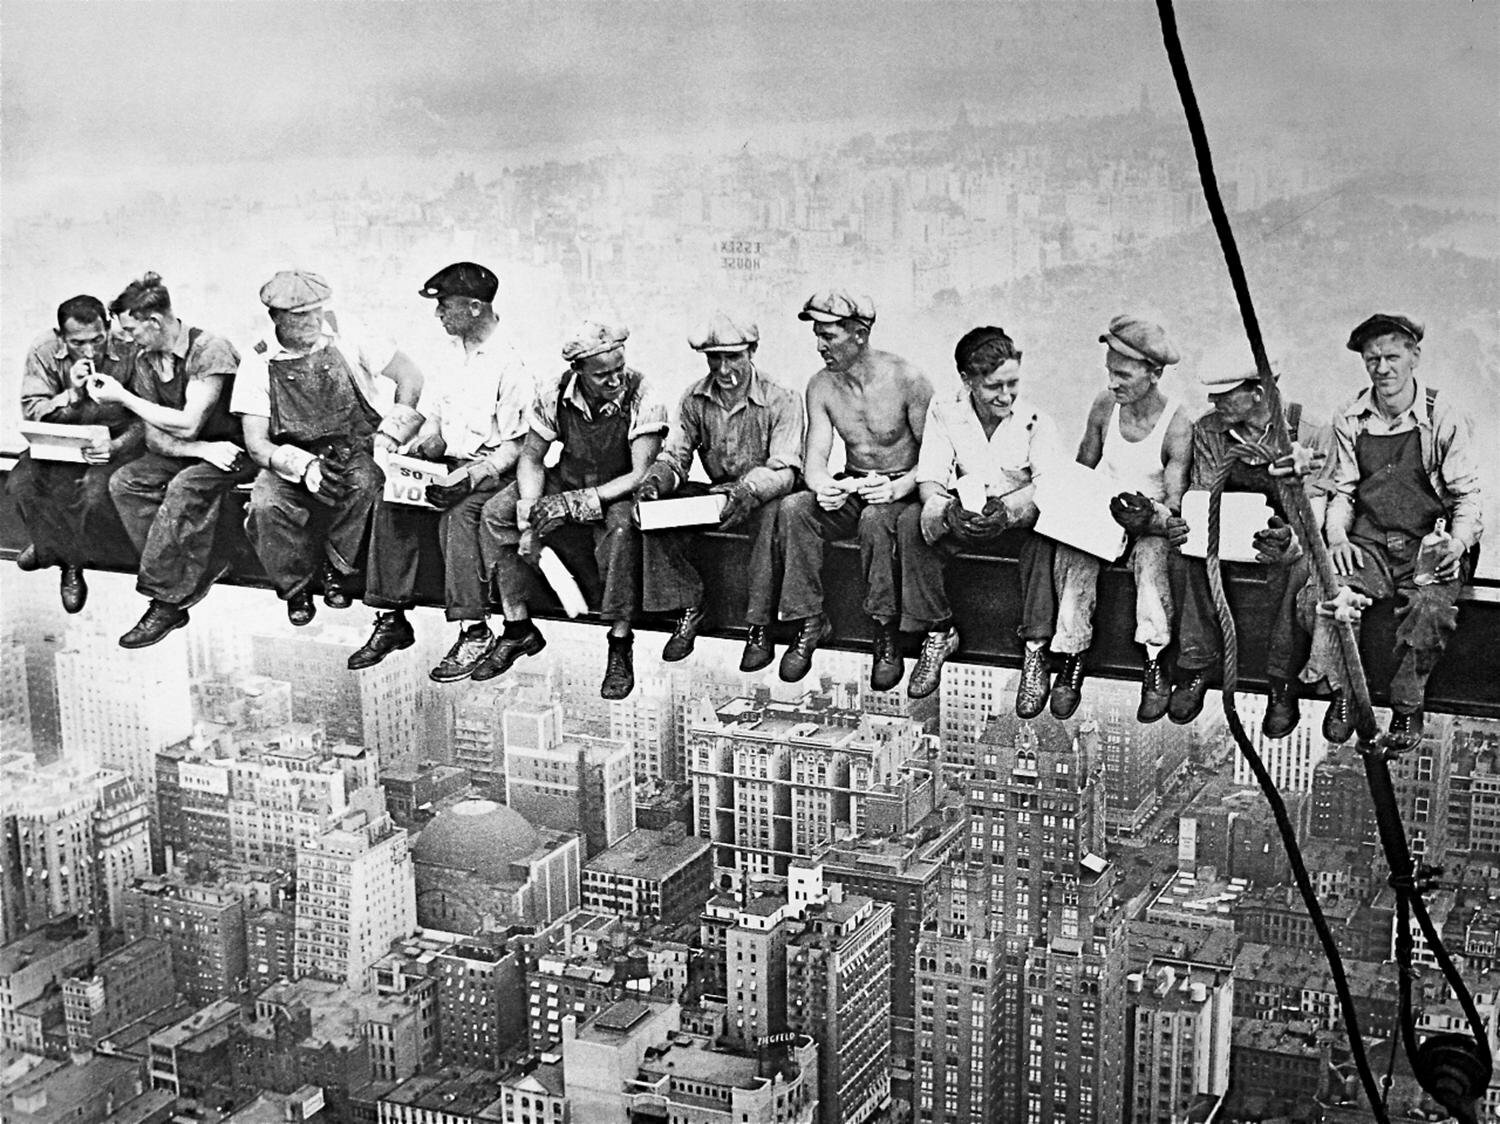 Buyartforless Men ATOP a Skyscraper Steel Beam Lunchtime ATOP NYC by John C Ebbets 36x24 Photographic Art Print Poster Historical Black and White